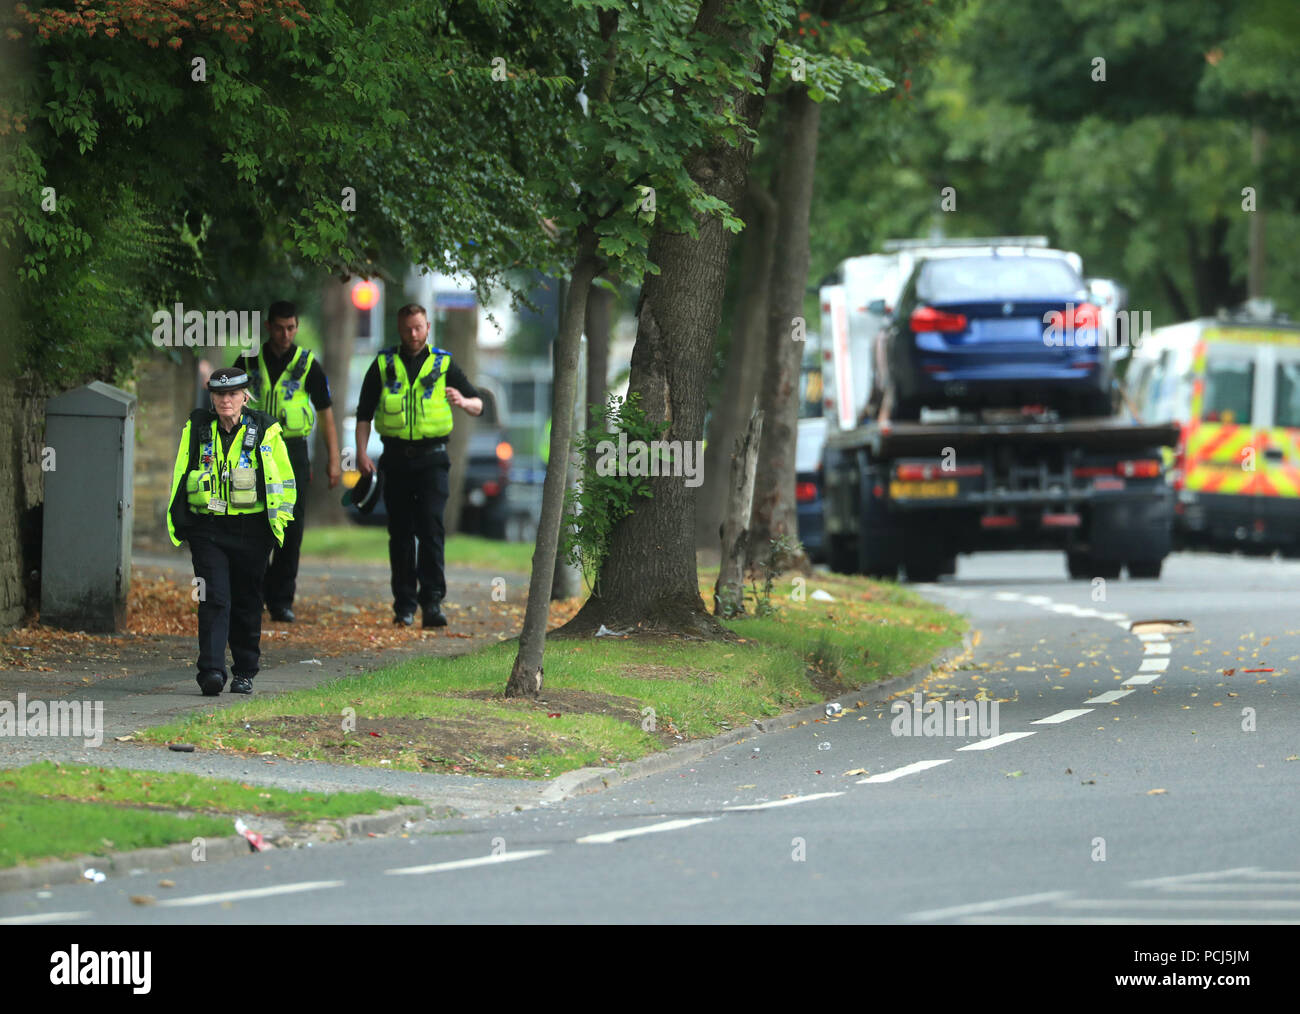 Police officers near the scene on Bingley Road at the junction with Toller Lane in Bradford following a road traffic collision where four males died in a car which was being followed by an unmarked police vehicle when it crashed. Stock Photo